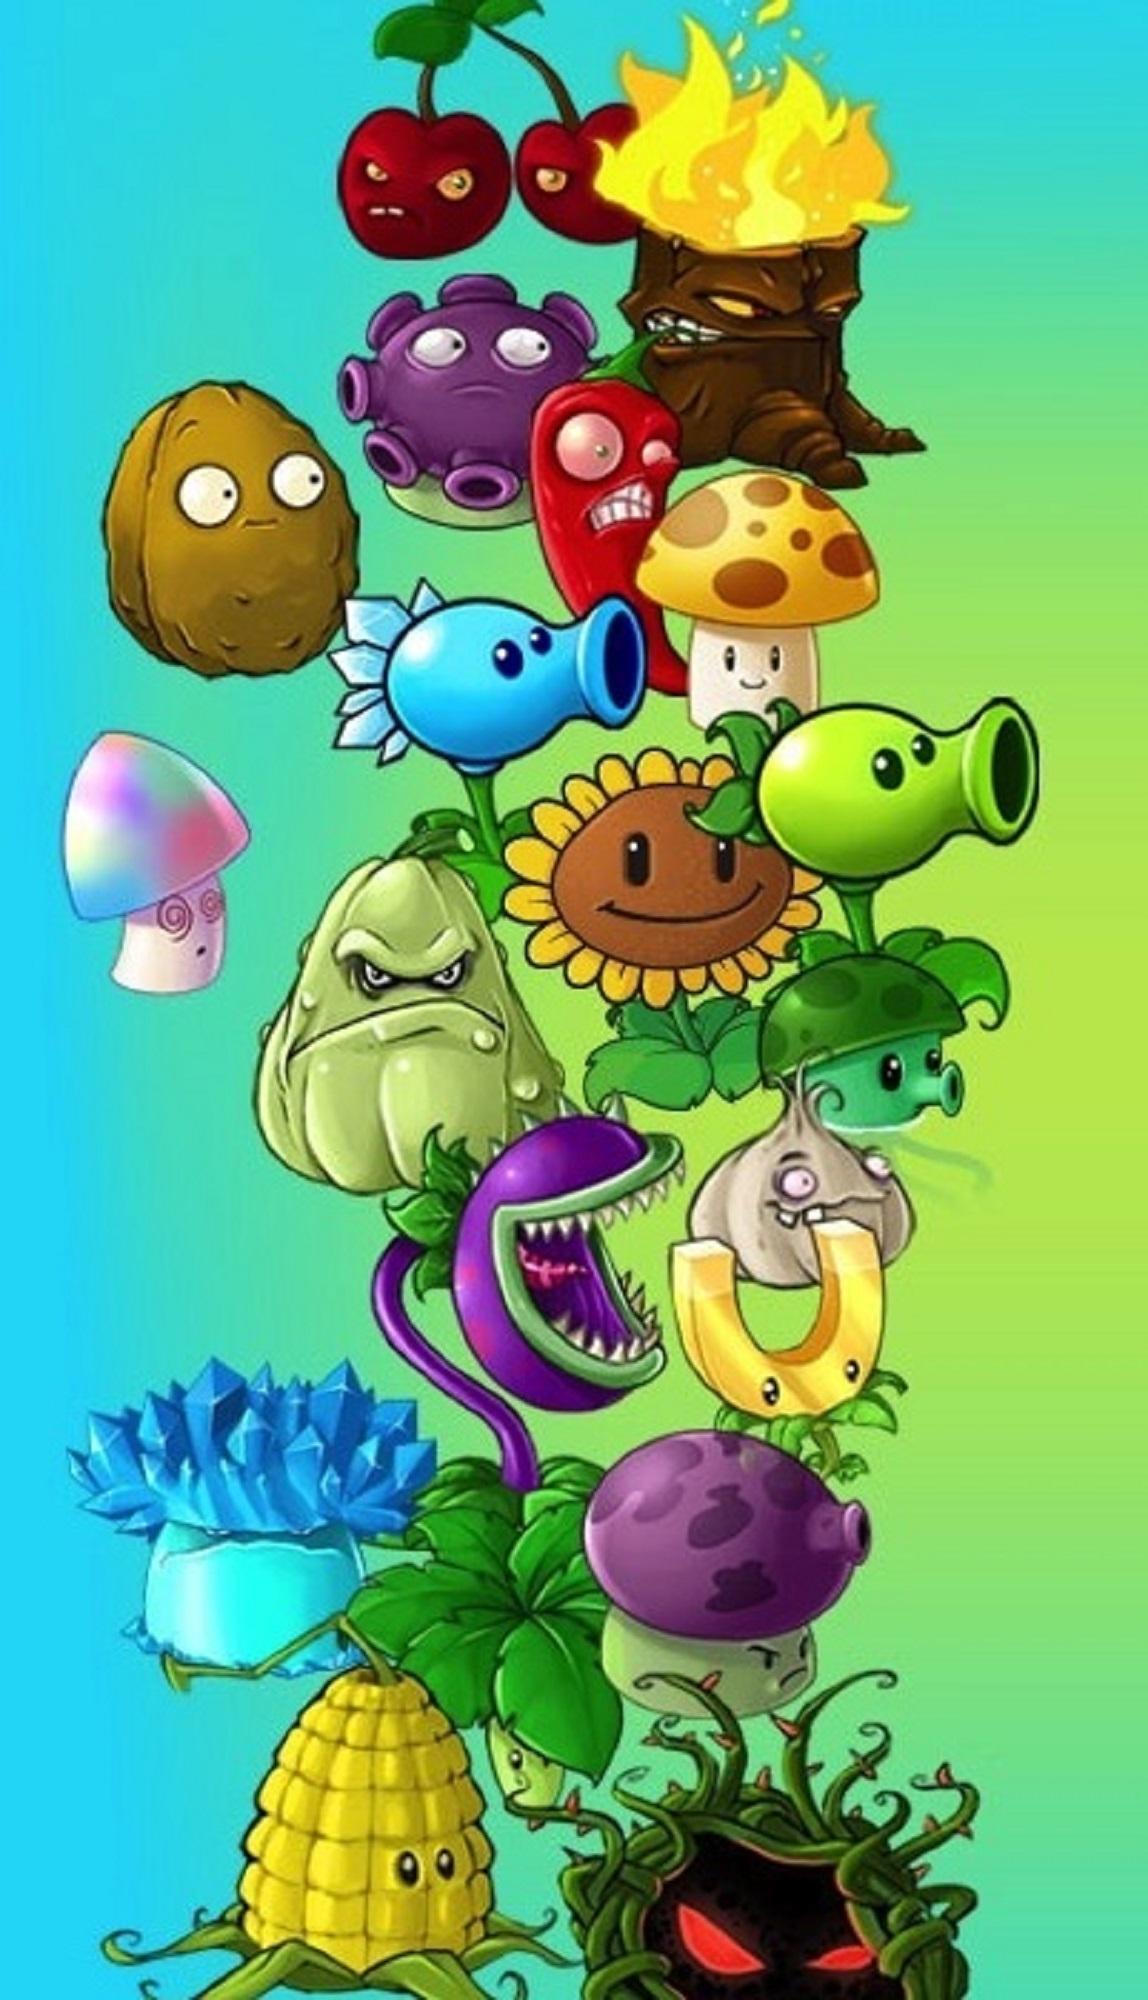 plants vs zombies free download for android